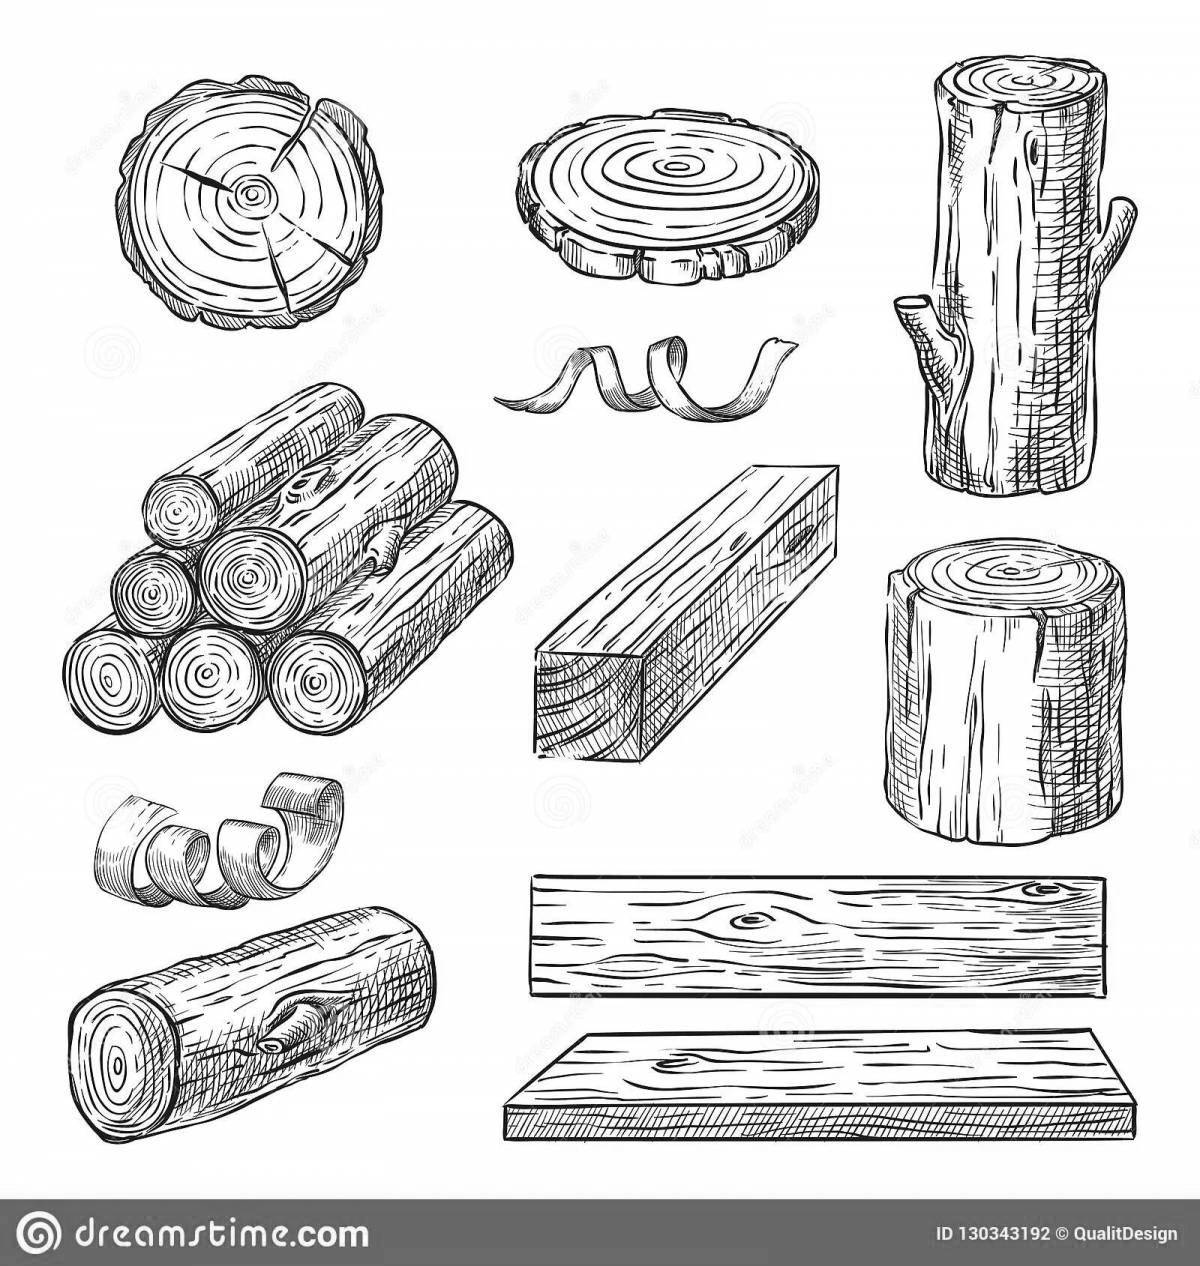 Awesome log coloring page